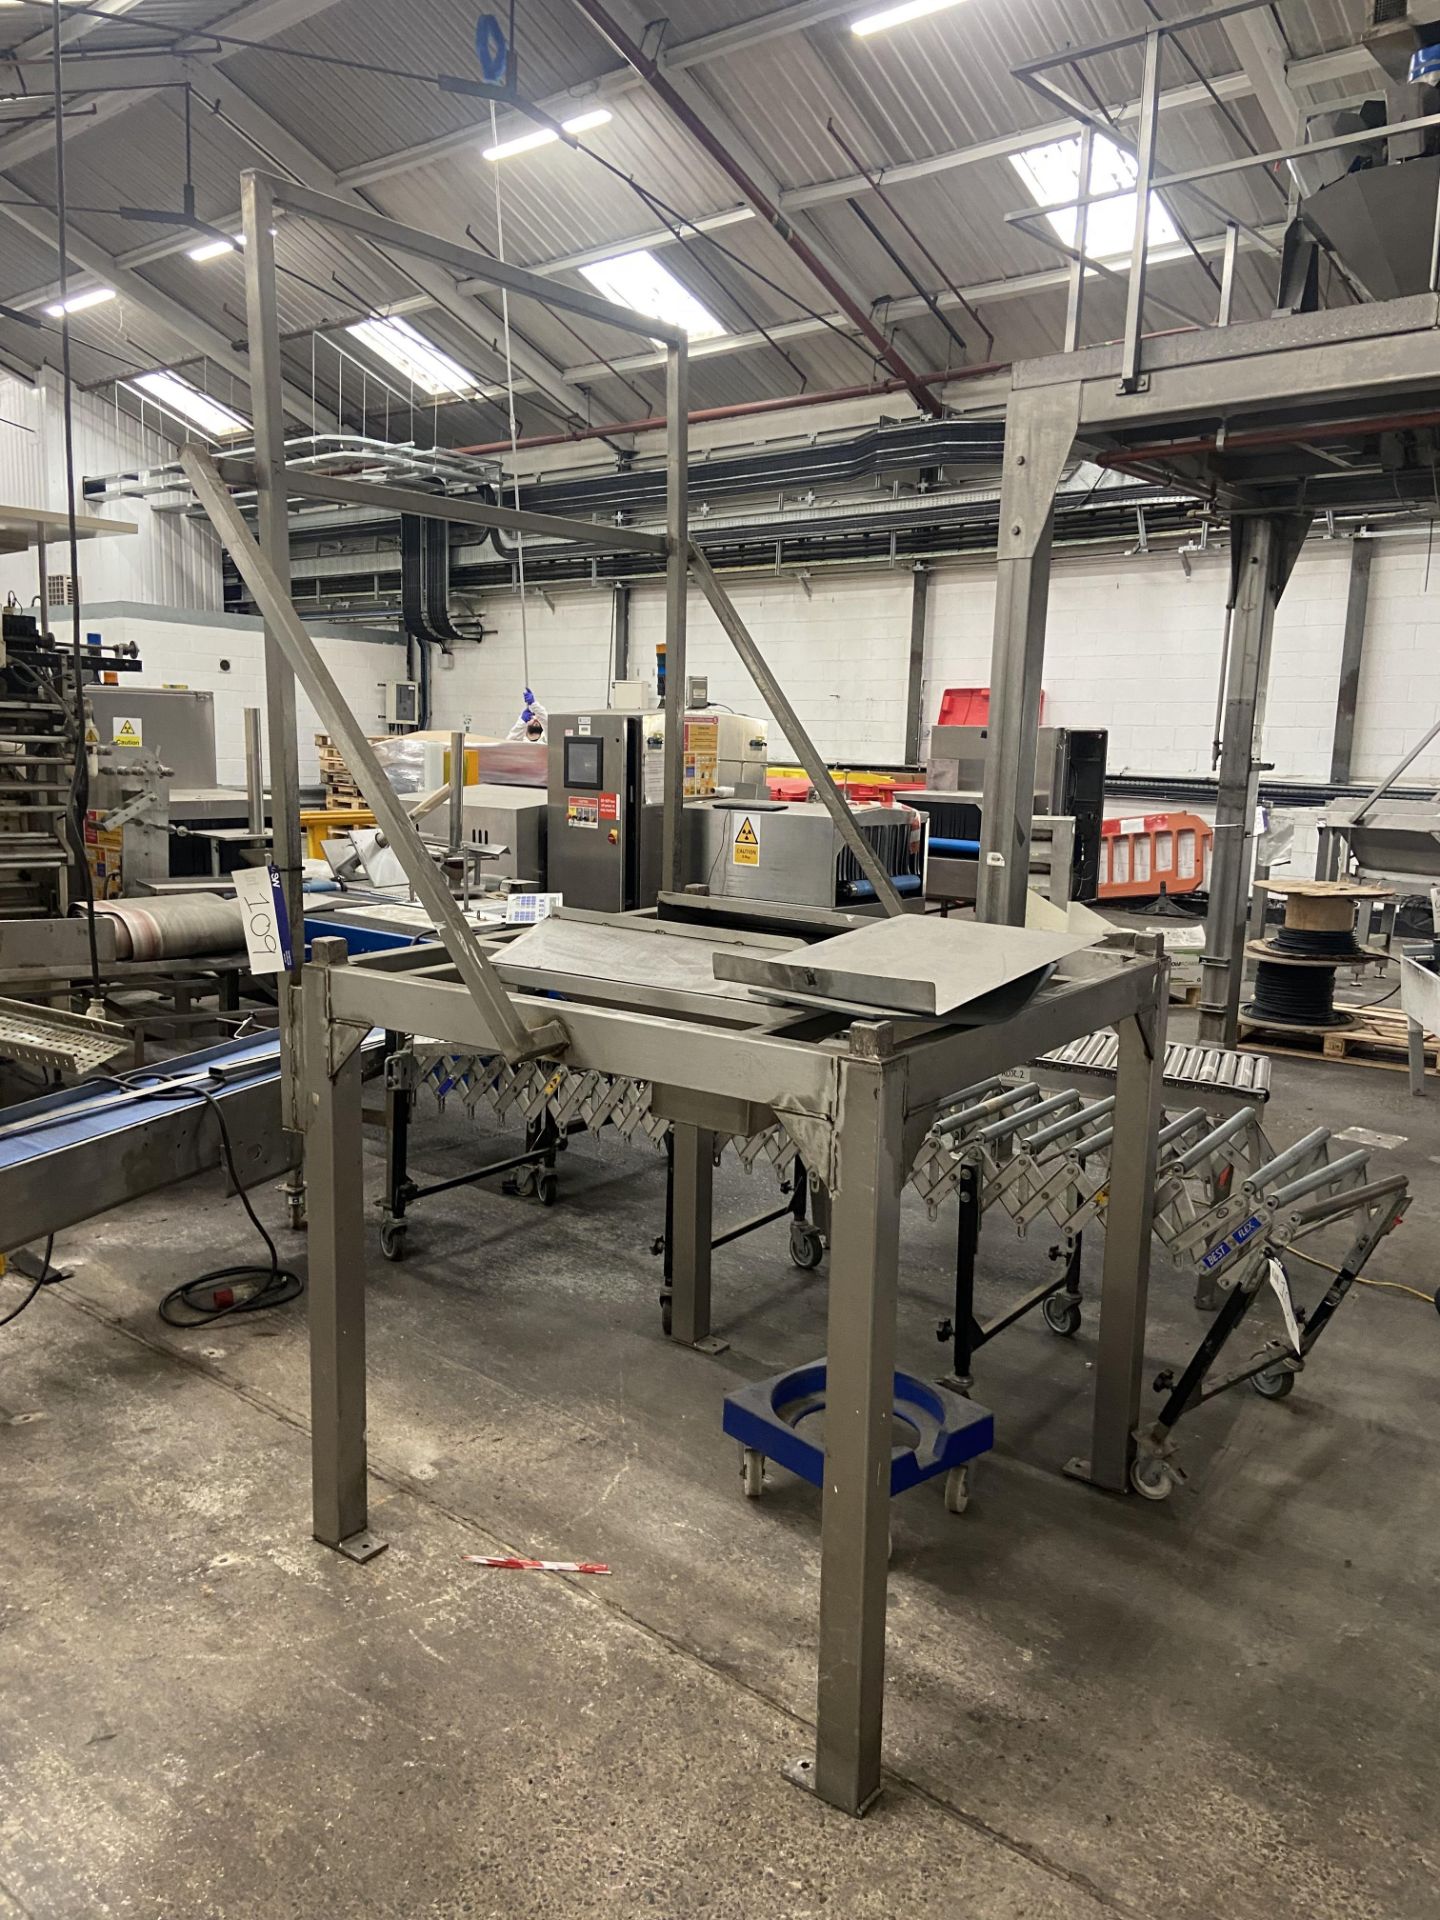 Stainless Steel Framed Hopper Stand, approx. 1.3m x 1.3m, with fitted chute, lot located in